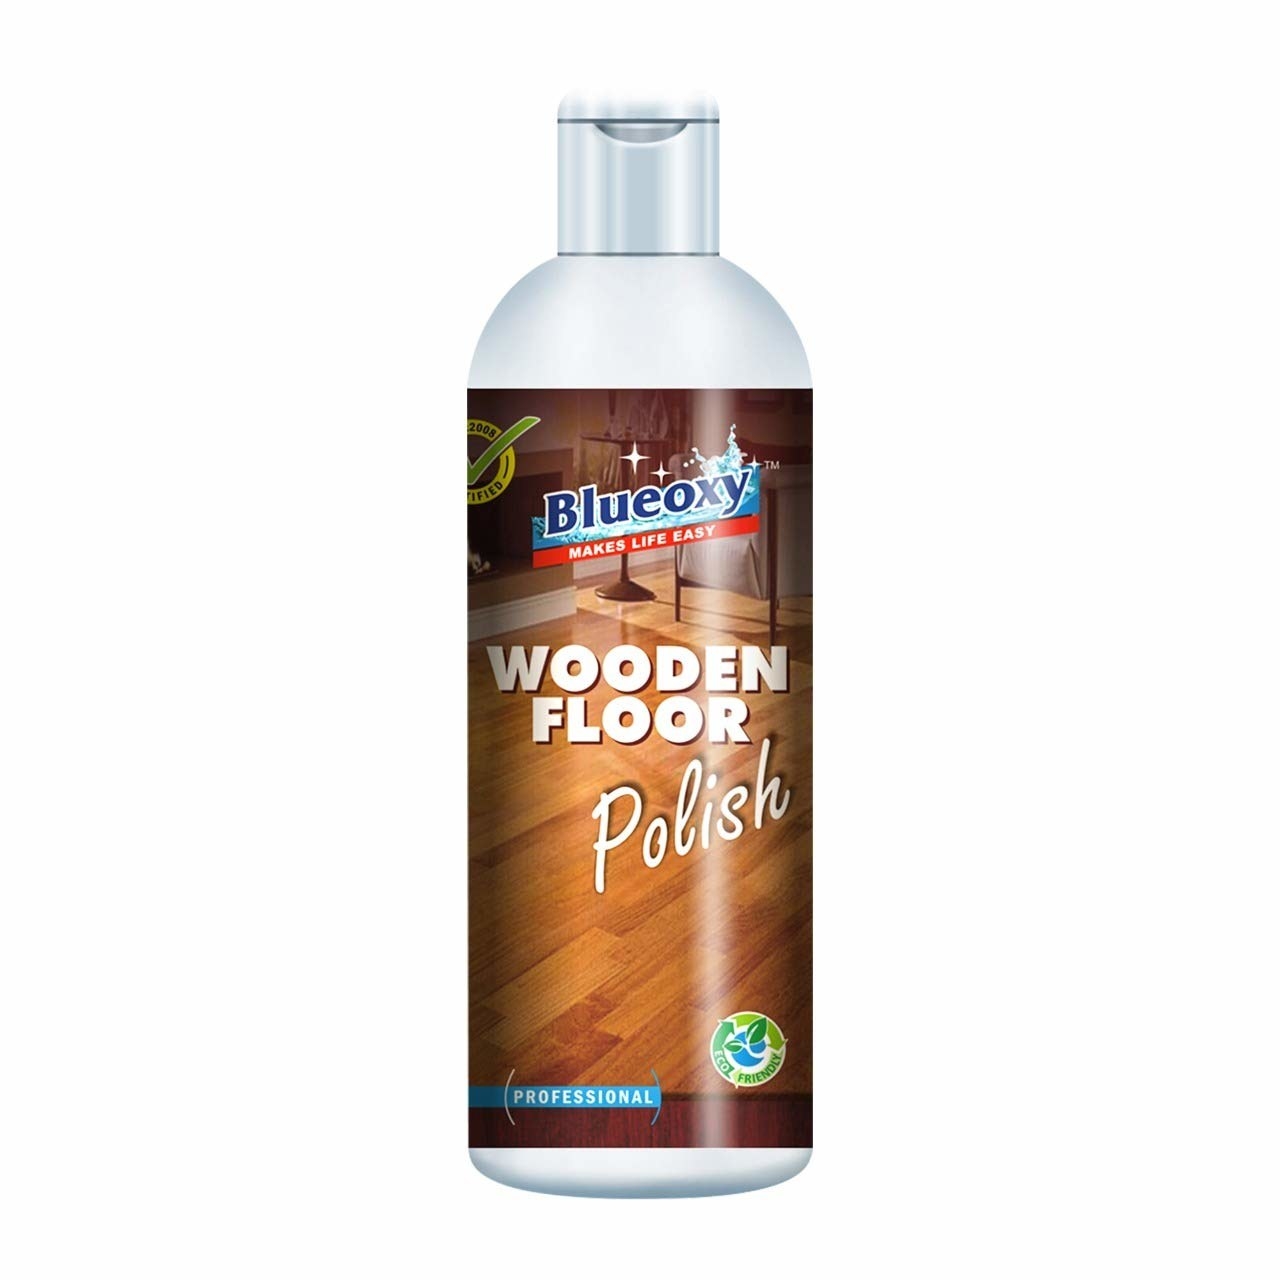 Packaging of the wood polisher bottle